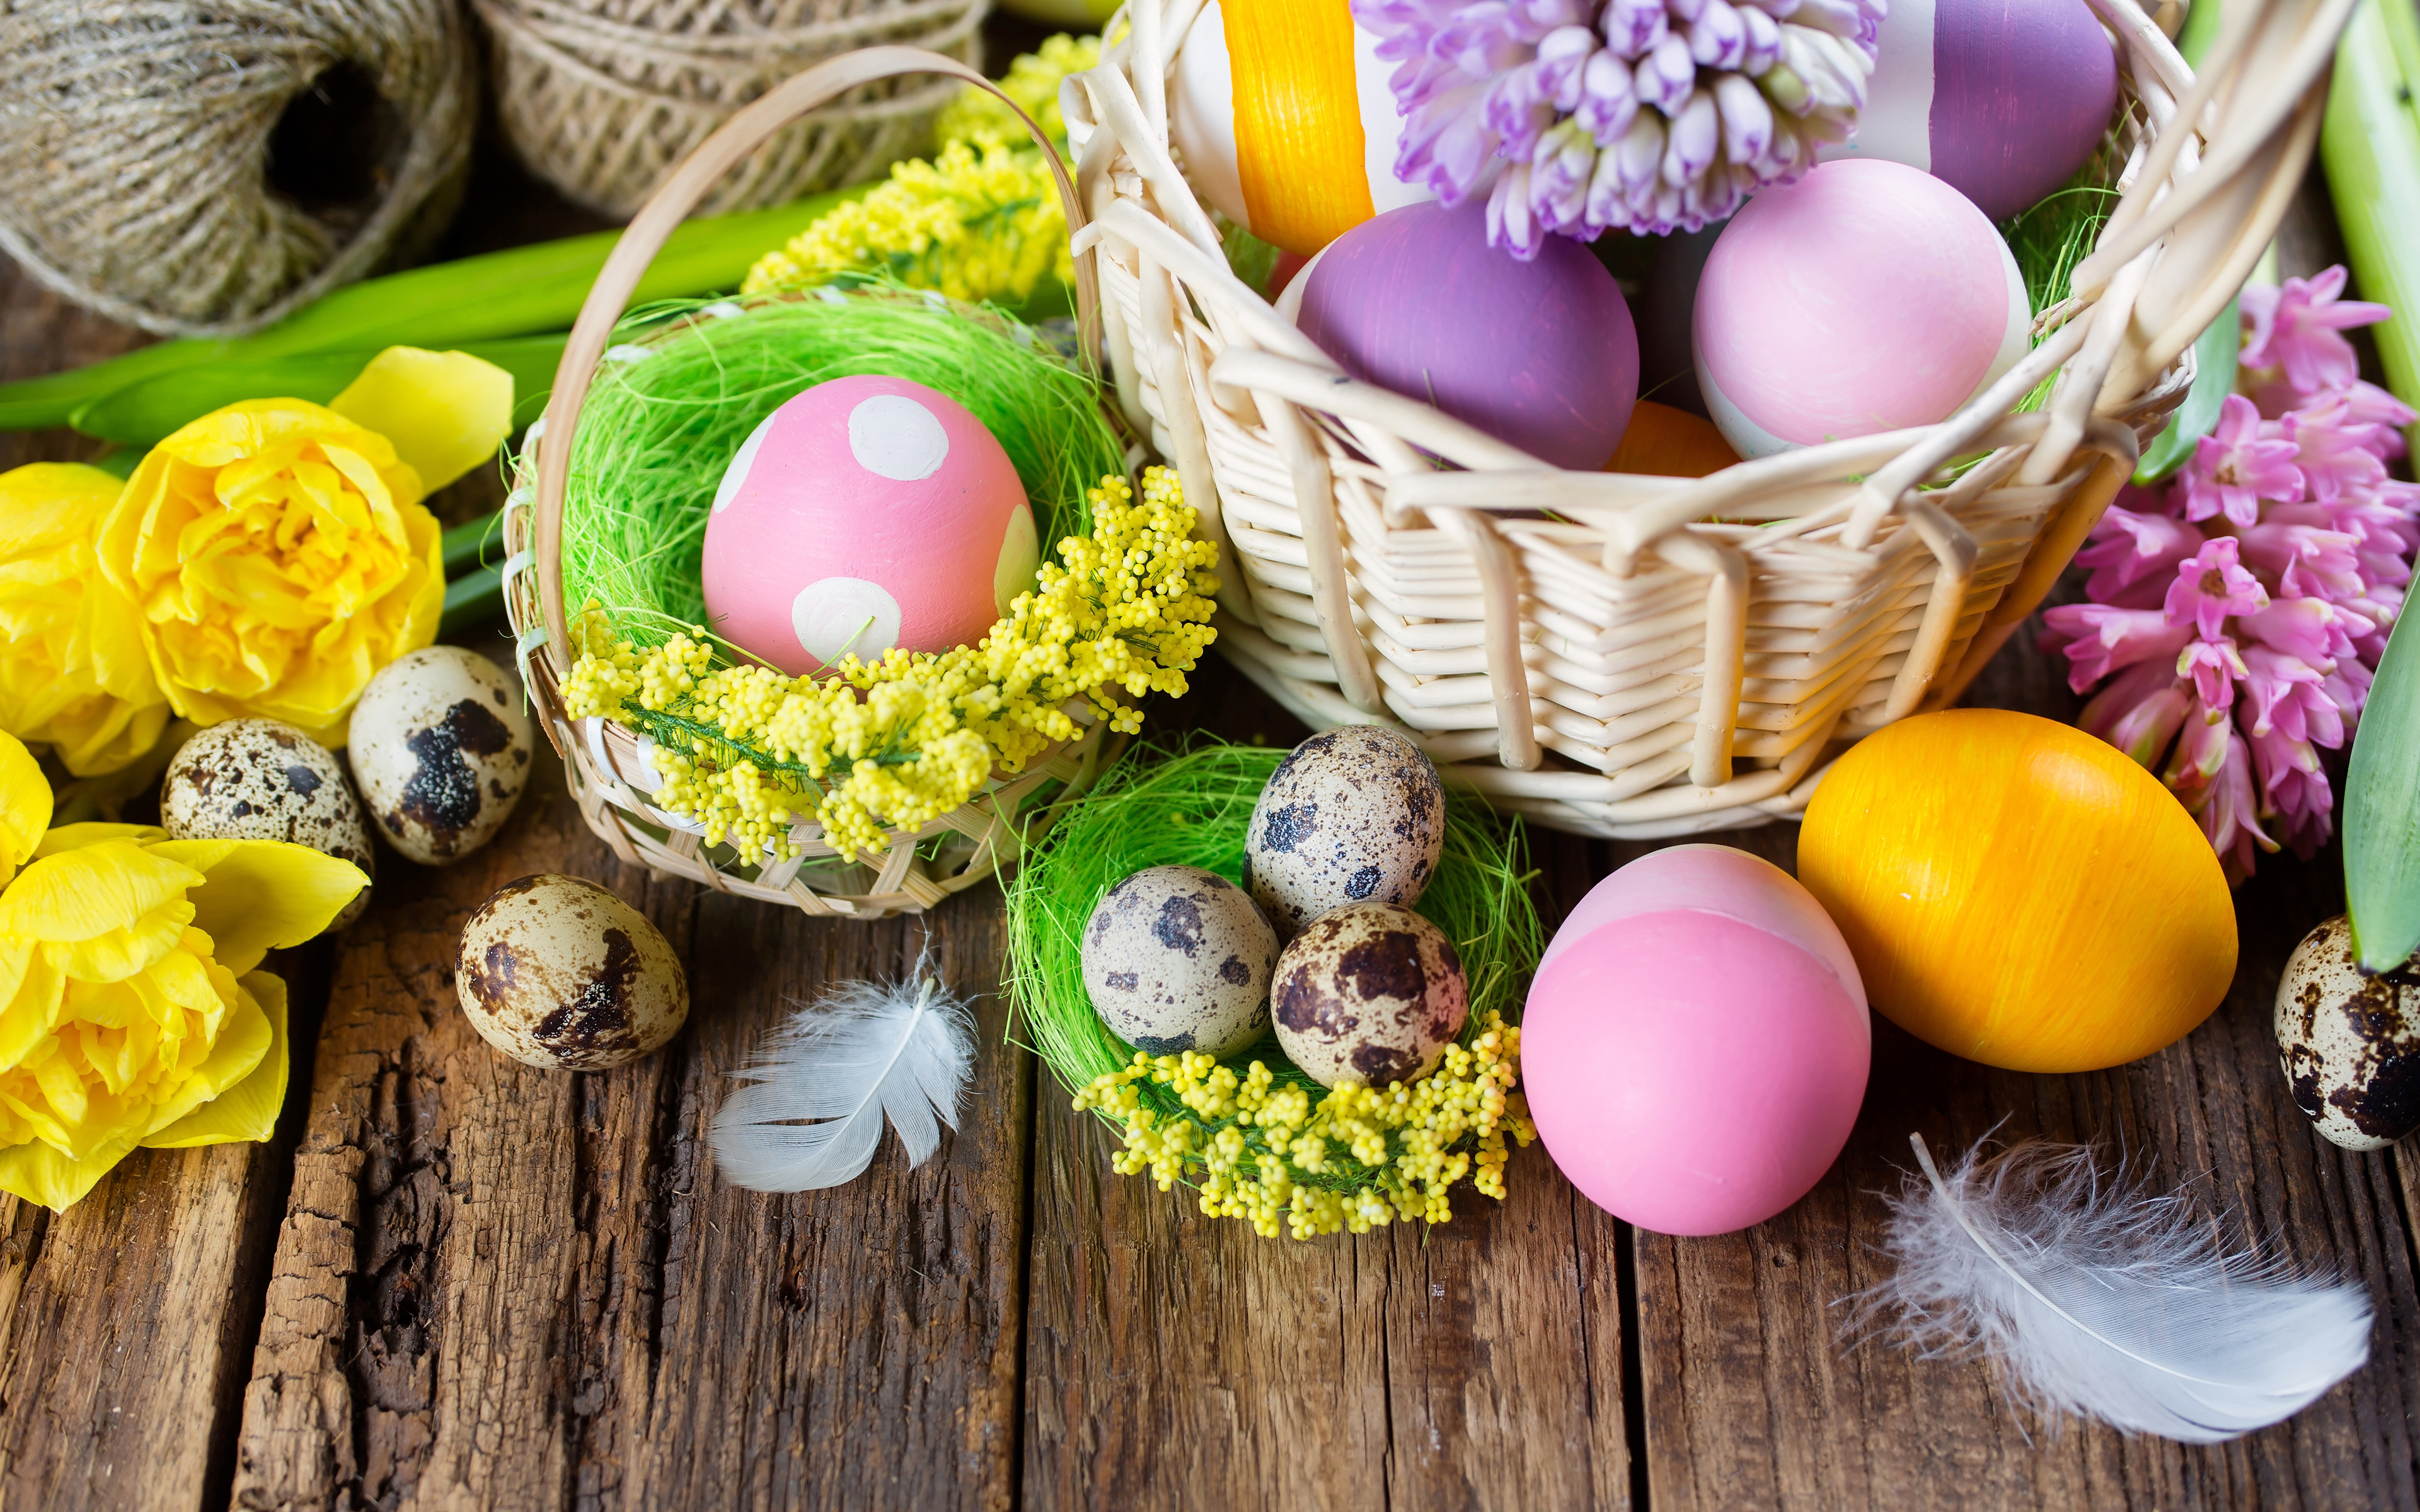 Download wallpaper 4k, Easter eggs, basket, Happy Easter, easter decoration, Easter for desktop with resolution 3840x2400. High Quality HD picture wallpaper